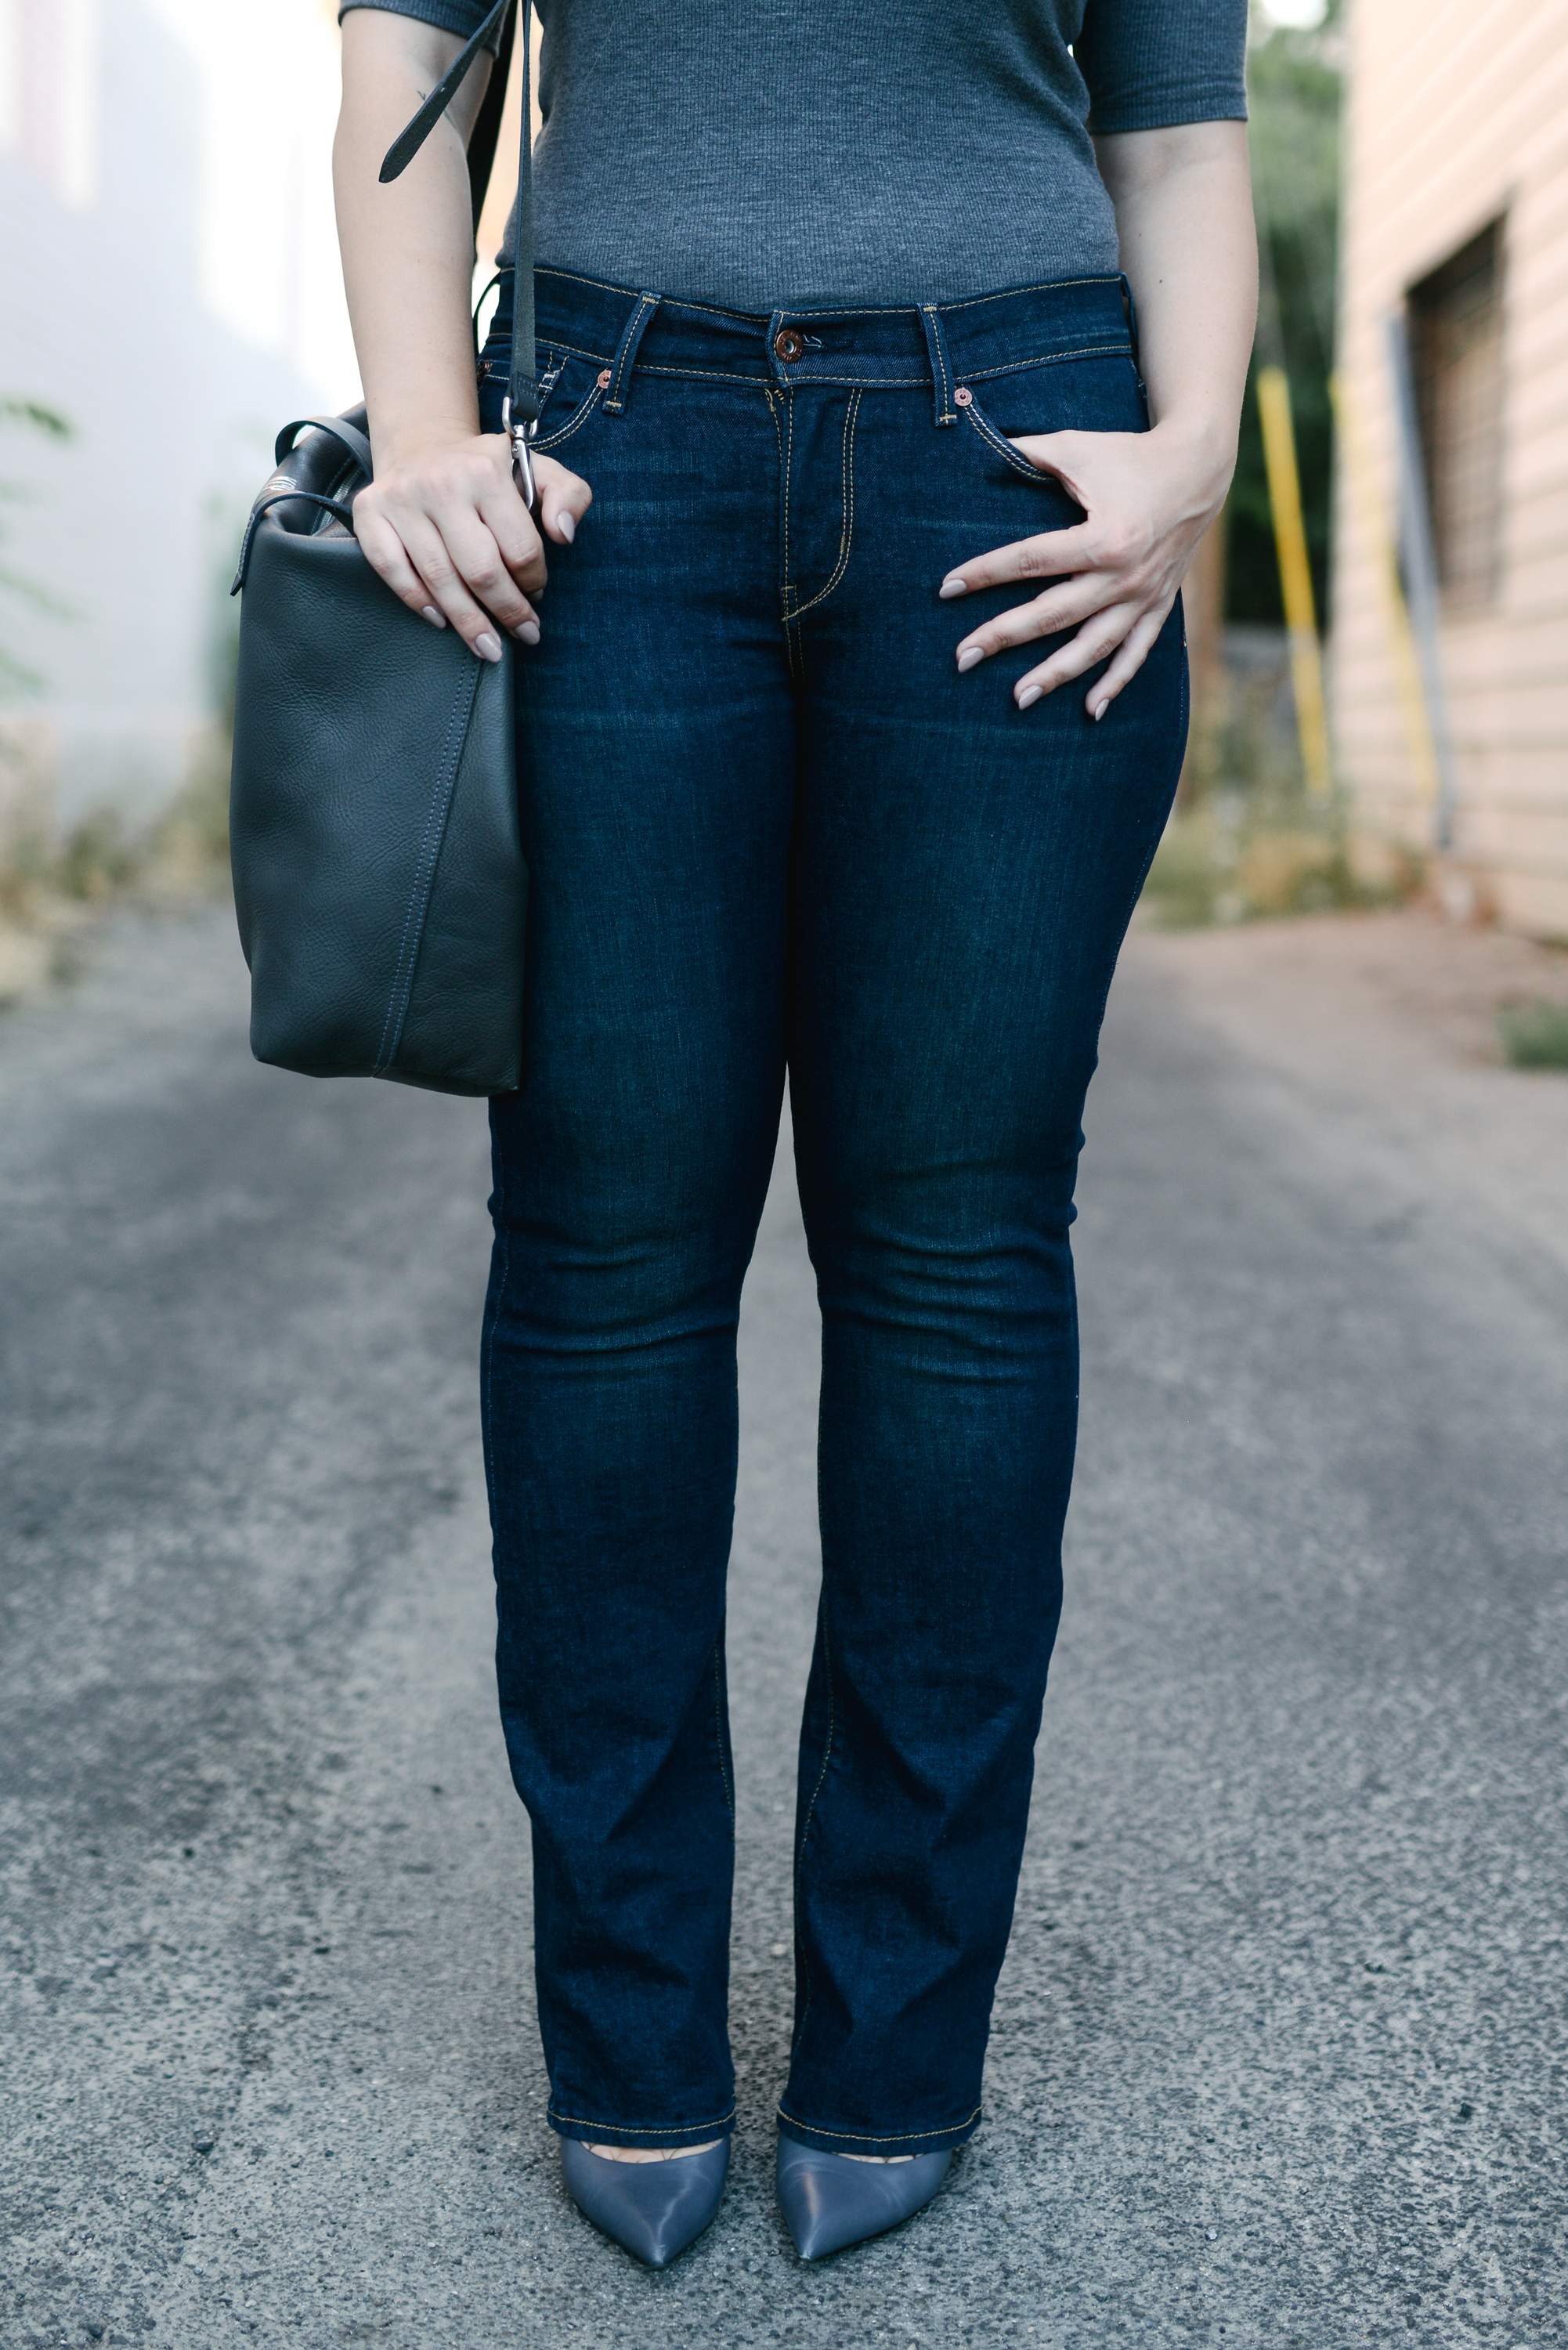 DENIZEN® FROM LEVI'S® JEANS FOR FALL - Eleventh & Sixteenth